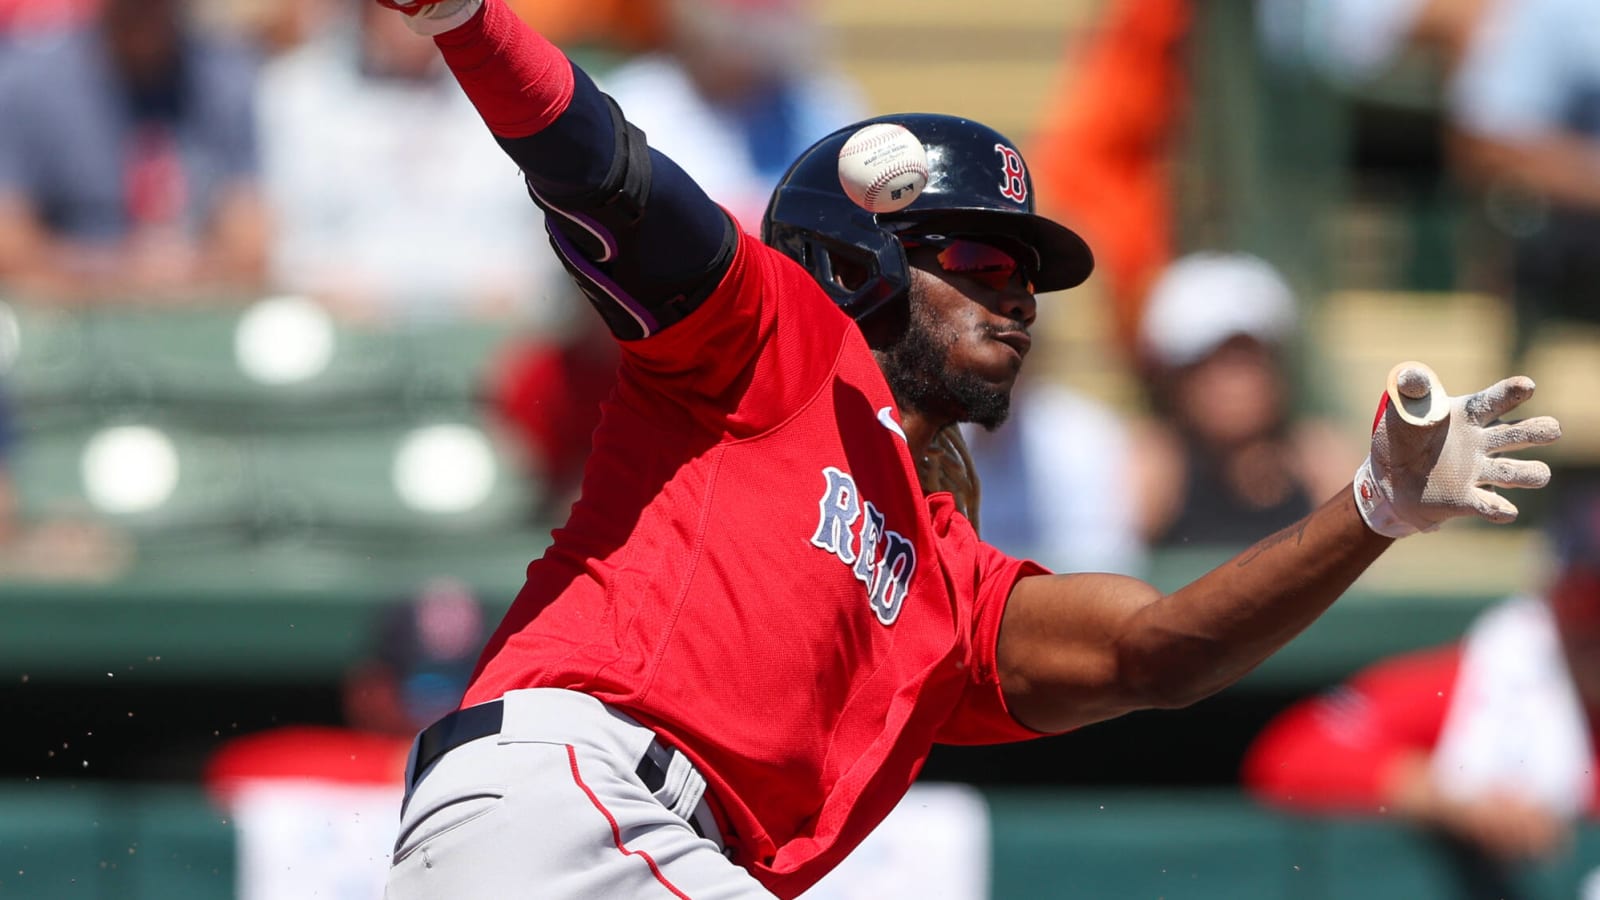 Red Sox OF Tapia to look into opportunities with other clubs